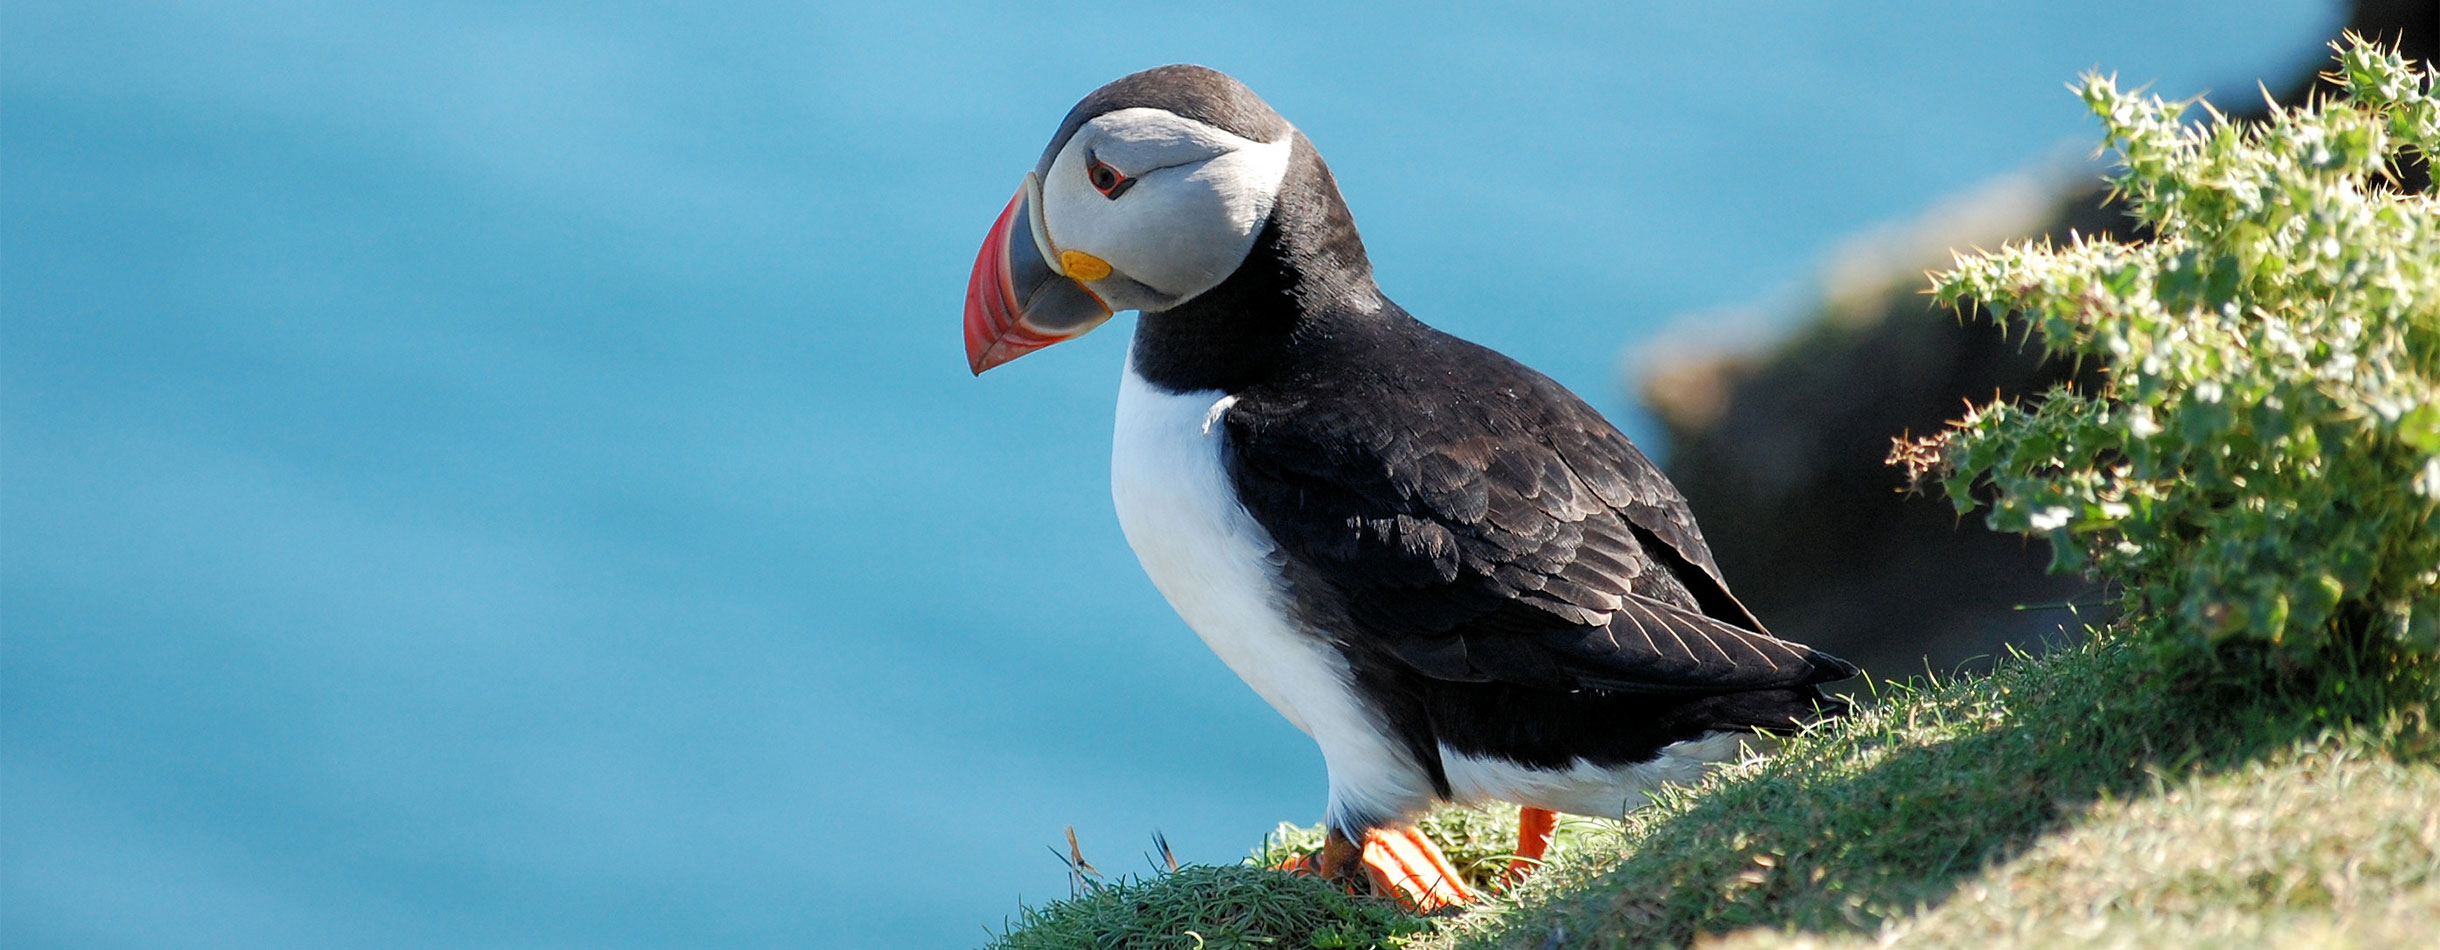 Puffin on the cliffs, Shetland, UK